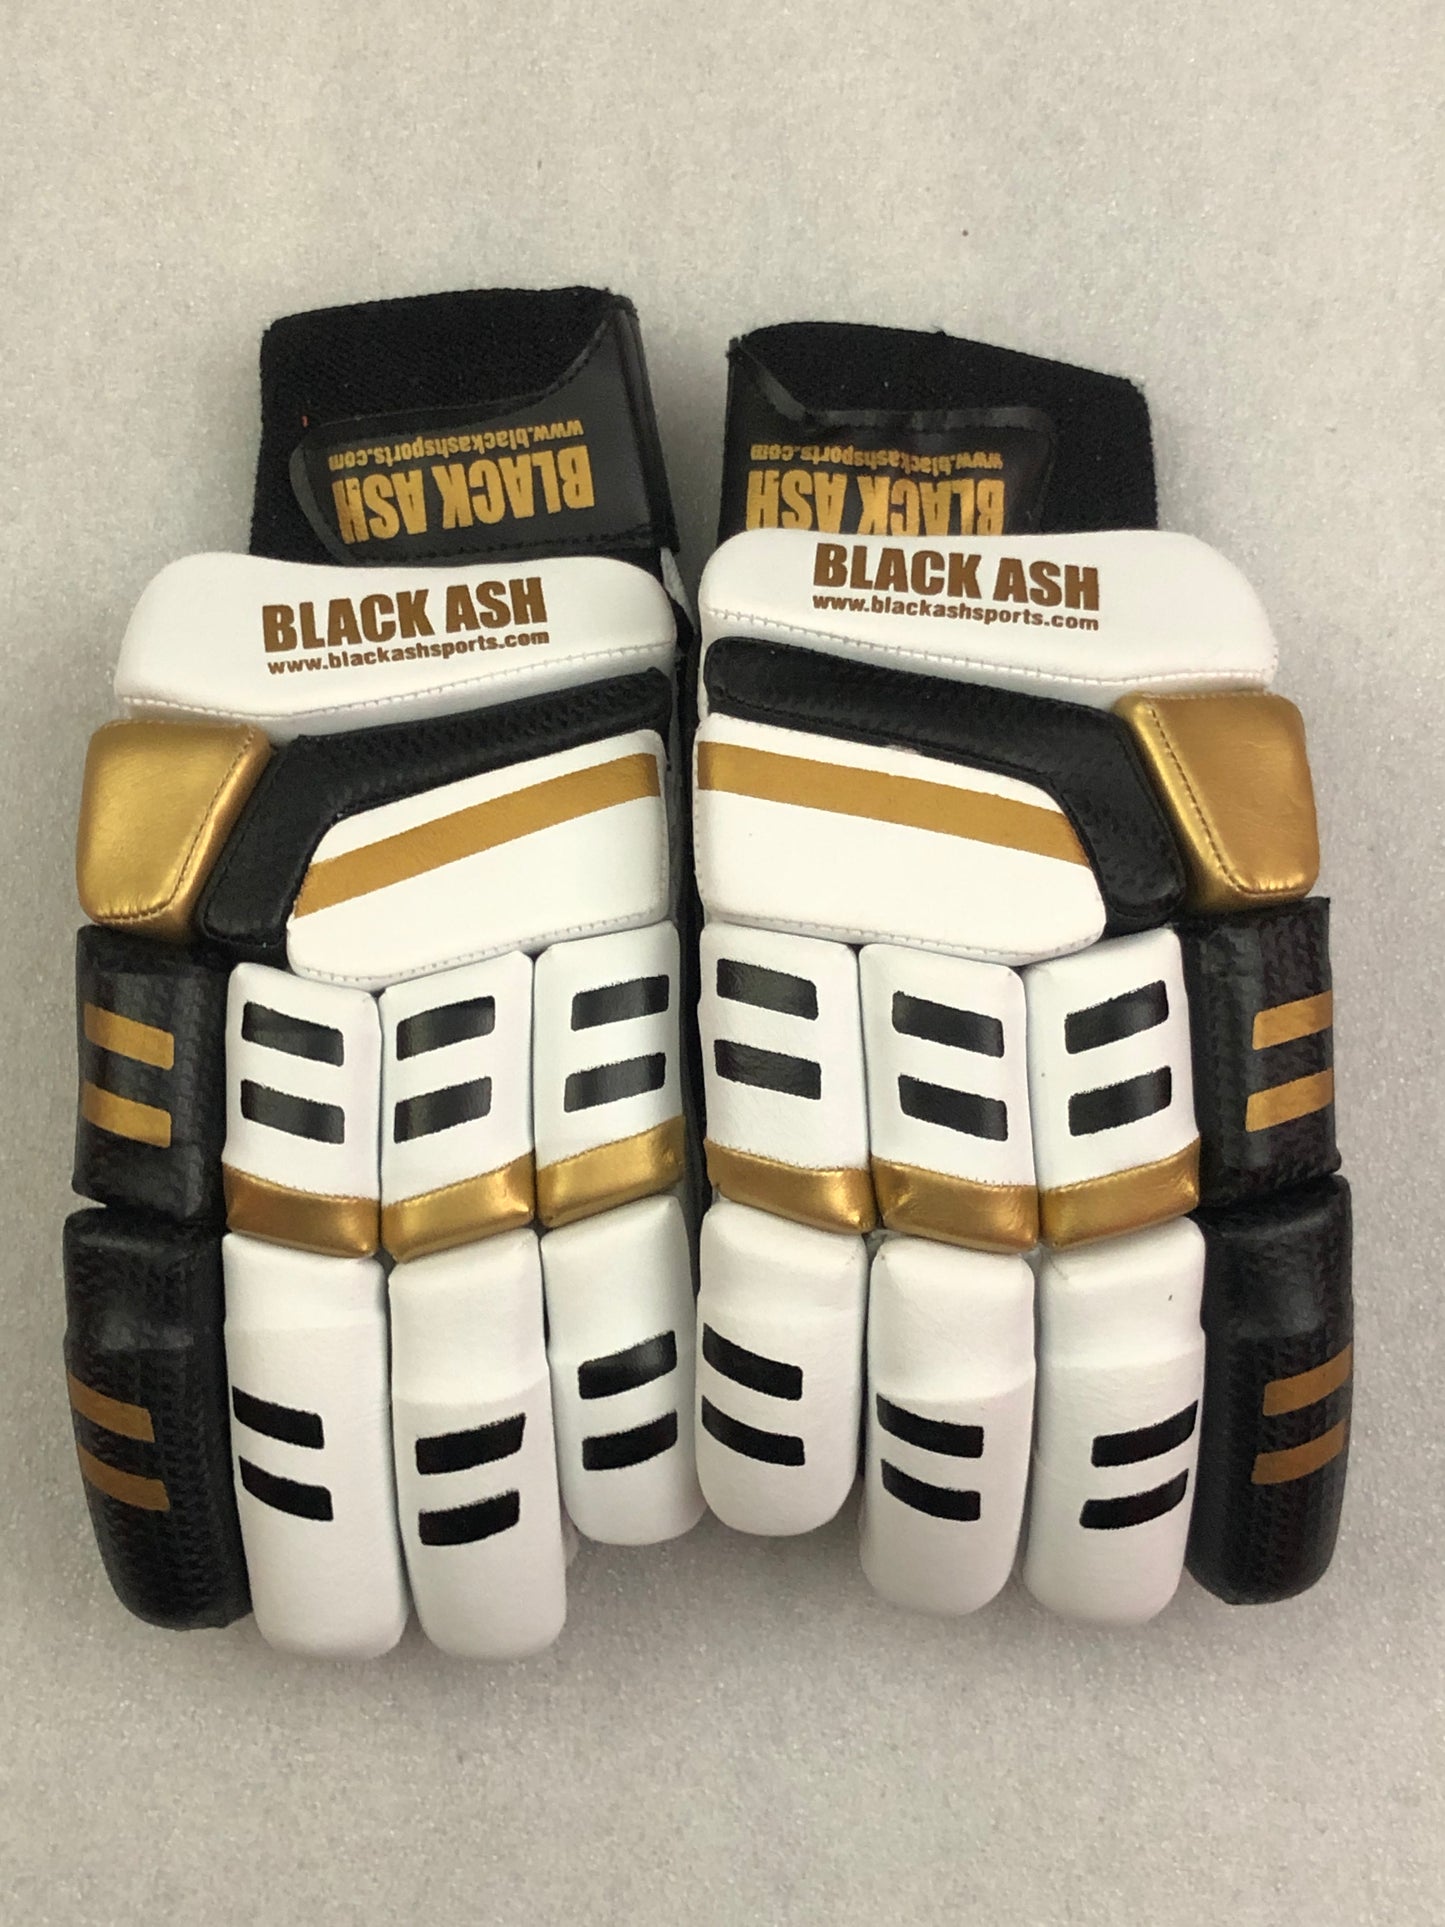 White/Gold Cricket Batting Gloves by Black Ash - Free Shipping